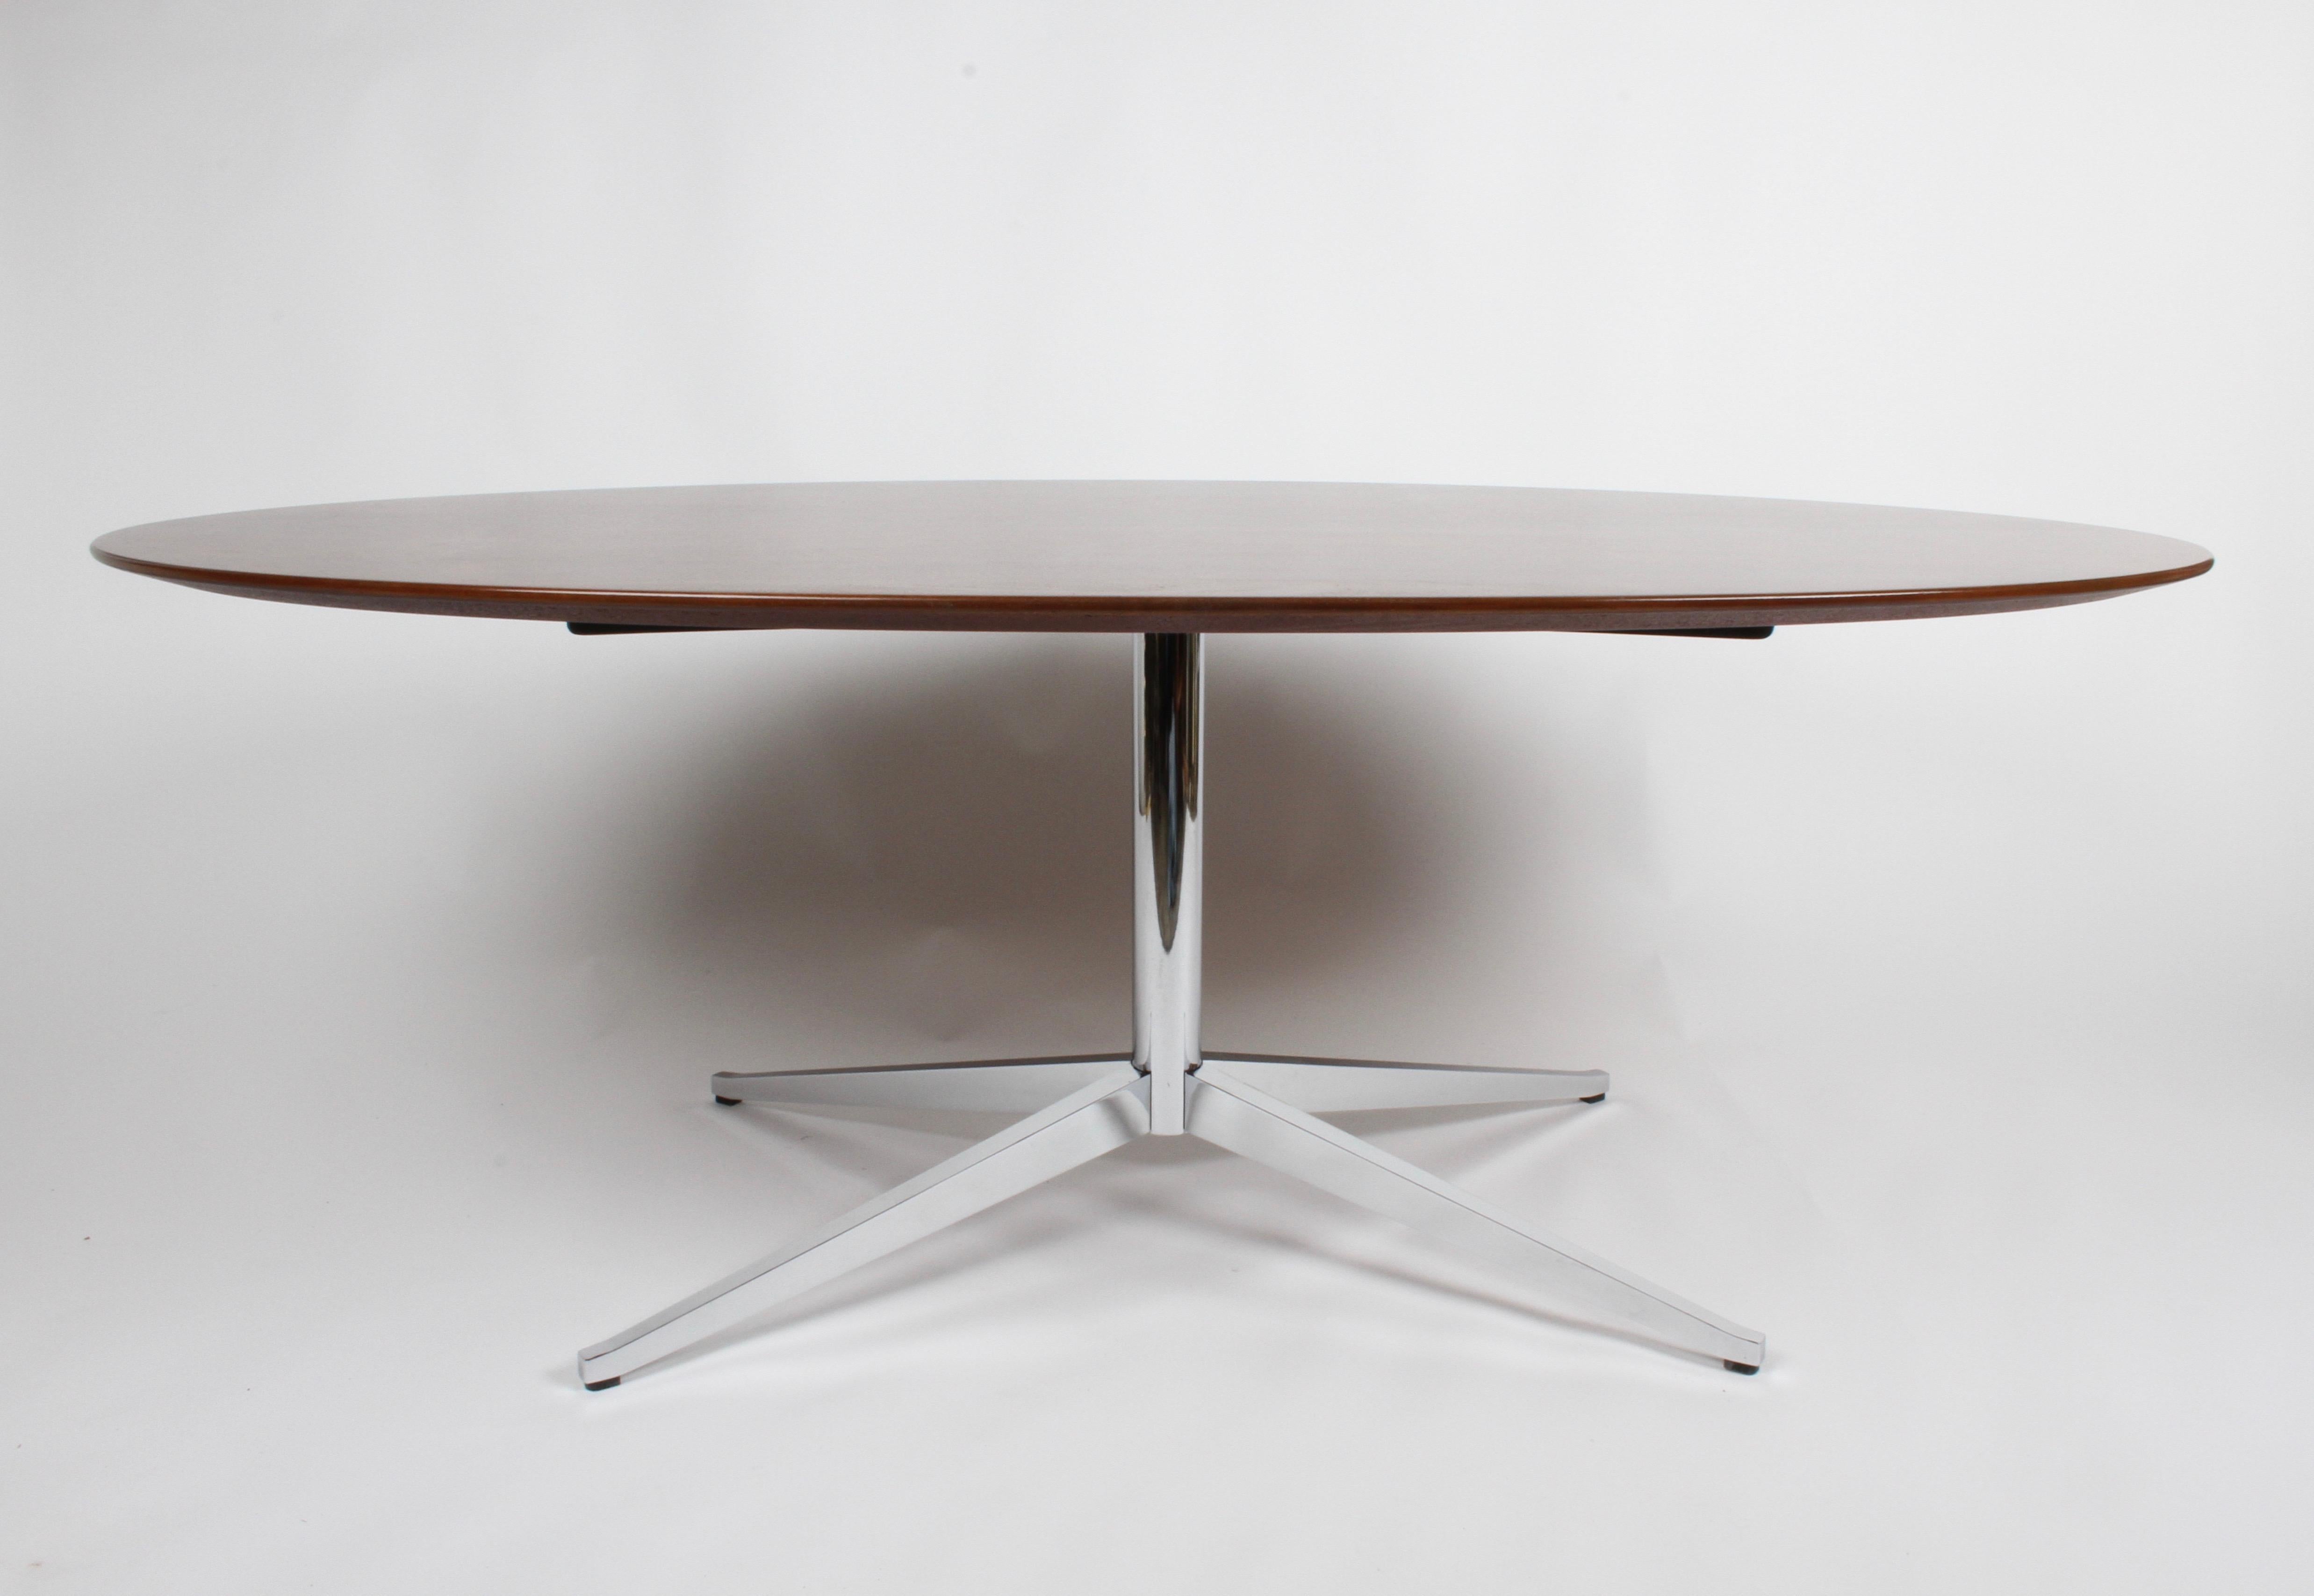 Restored Vintage Florence Knoll Oval Top Rosewood Dining or Conference Table In Good Condition For Sale In St. Louis, MO